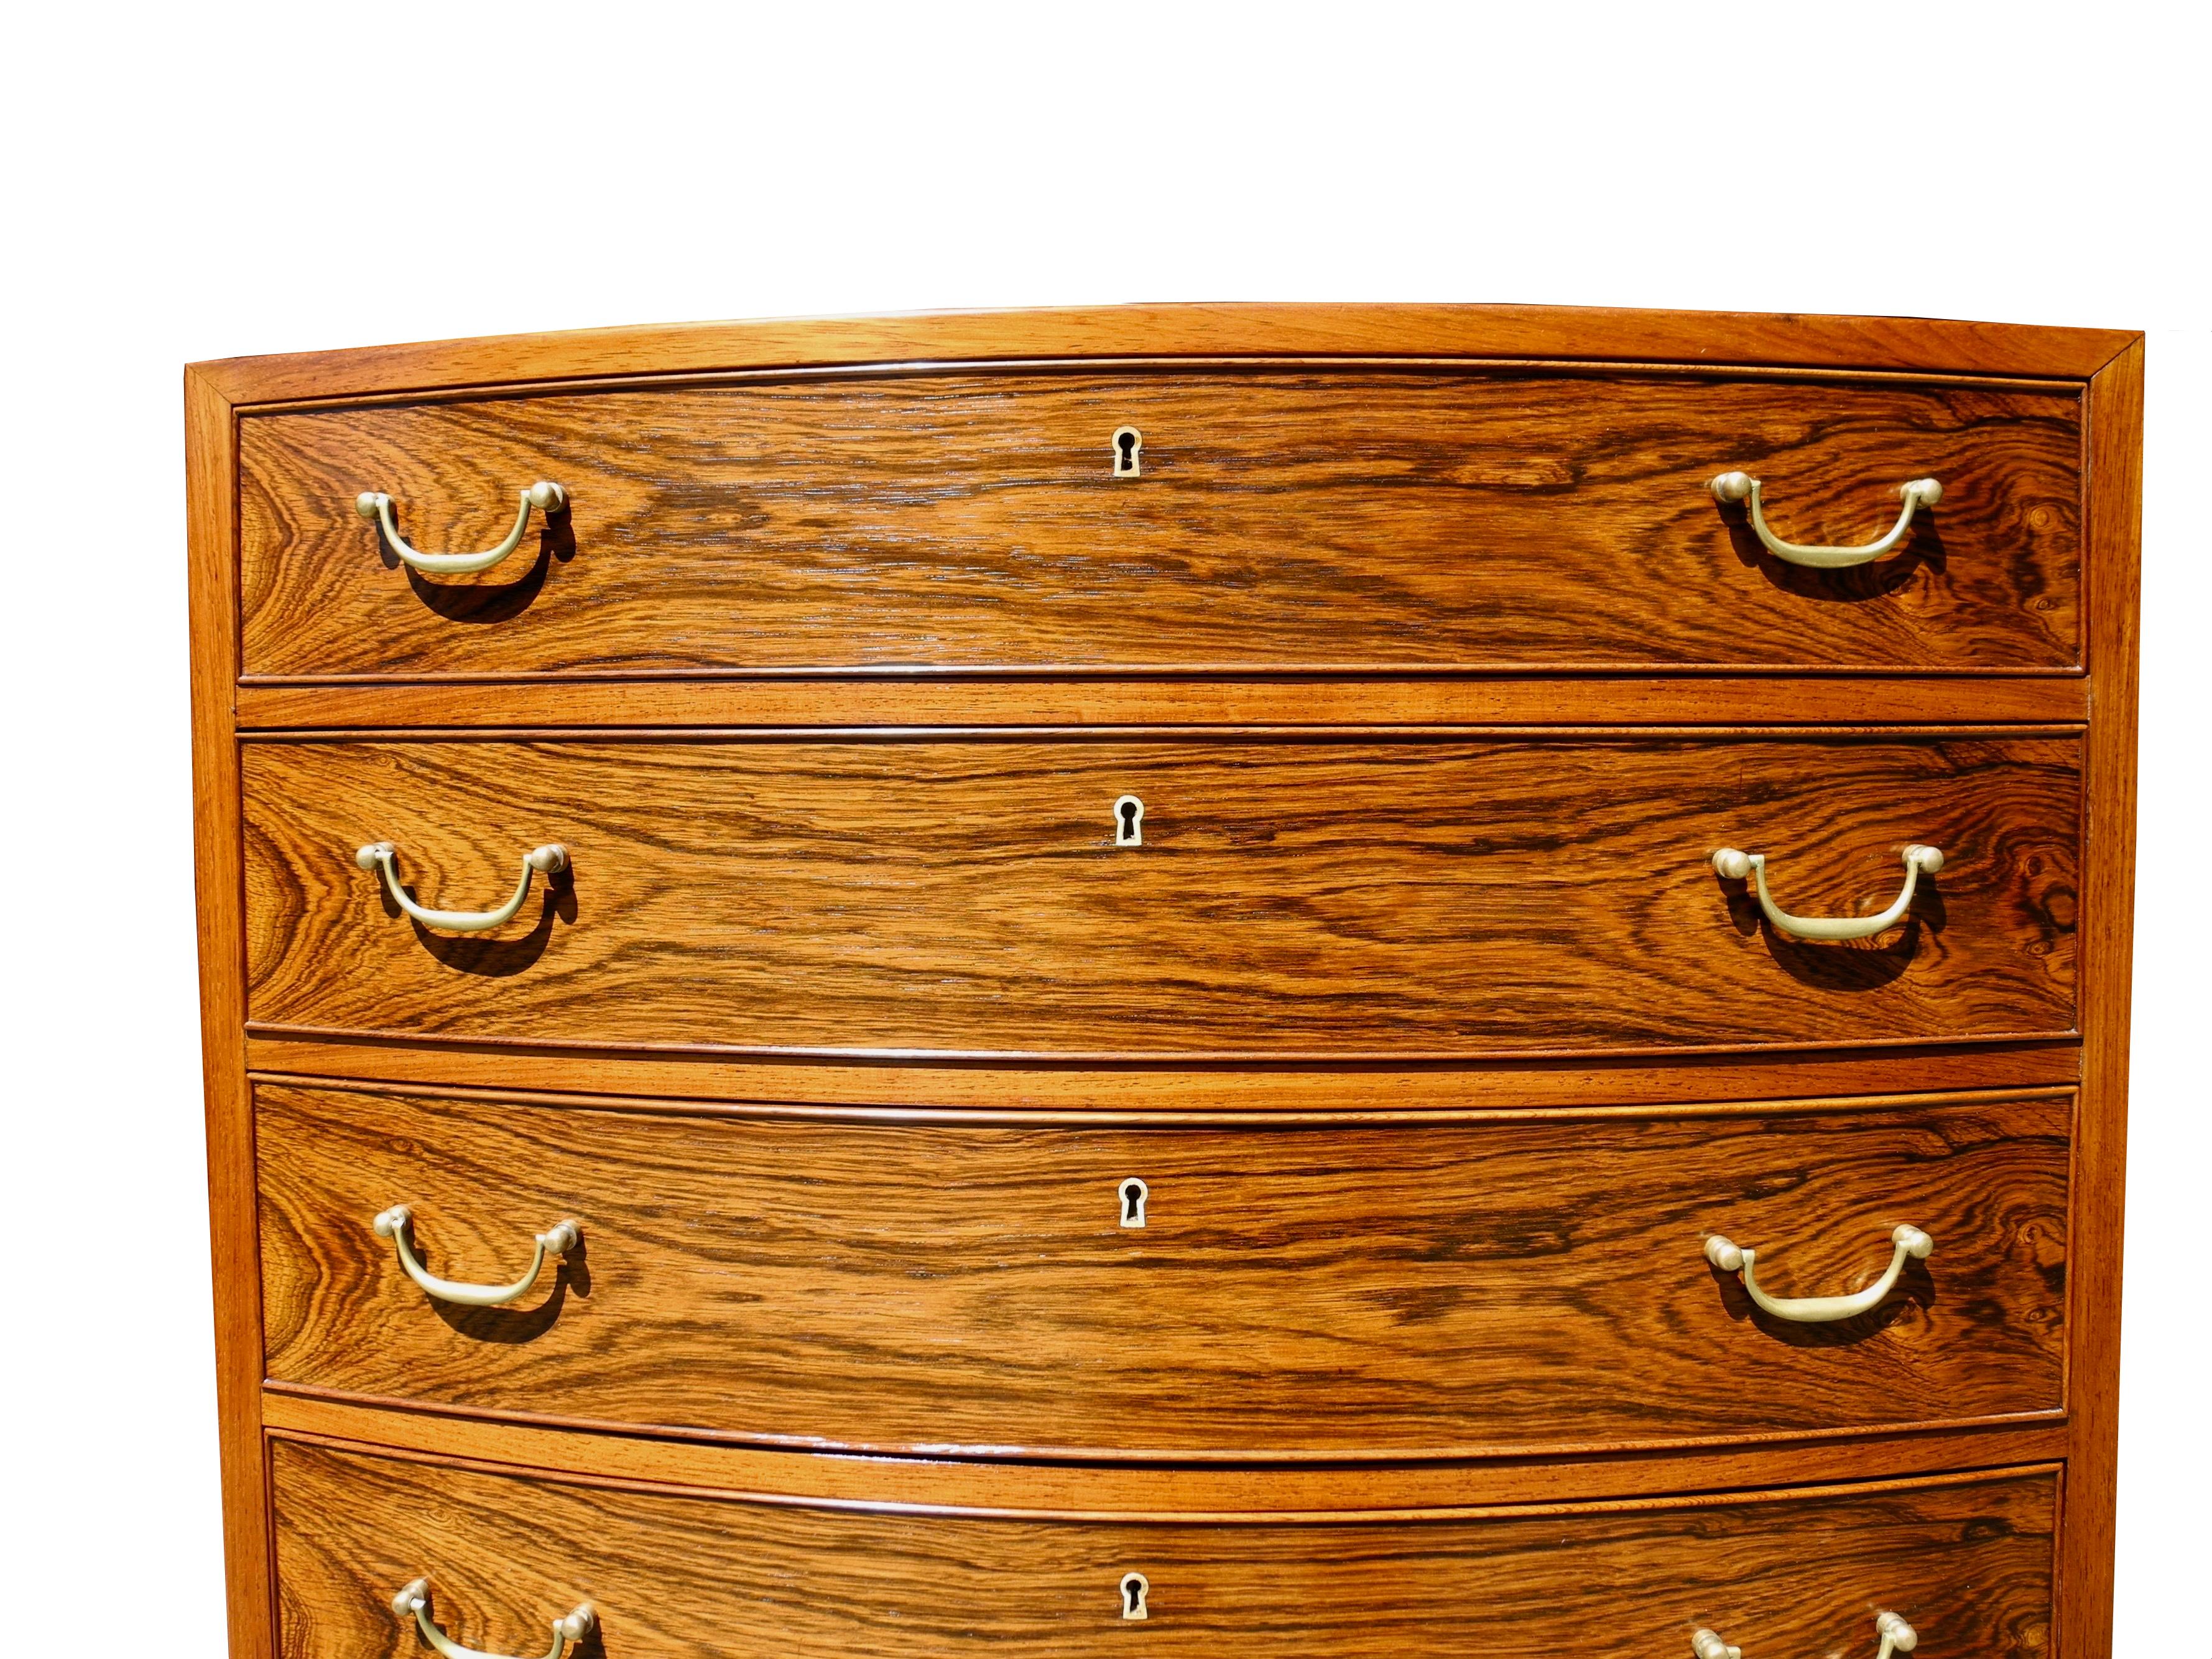 Danish Modern Tall Rosewood Bombe Dresser or Chest of Drawers by Ole Wanscher In Good Condition For Sale In Hudson, NY